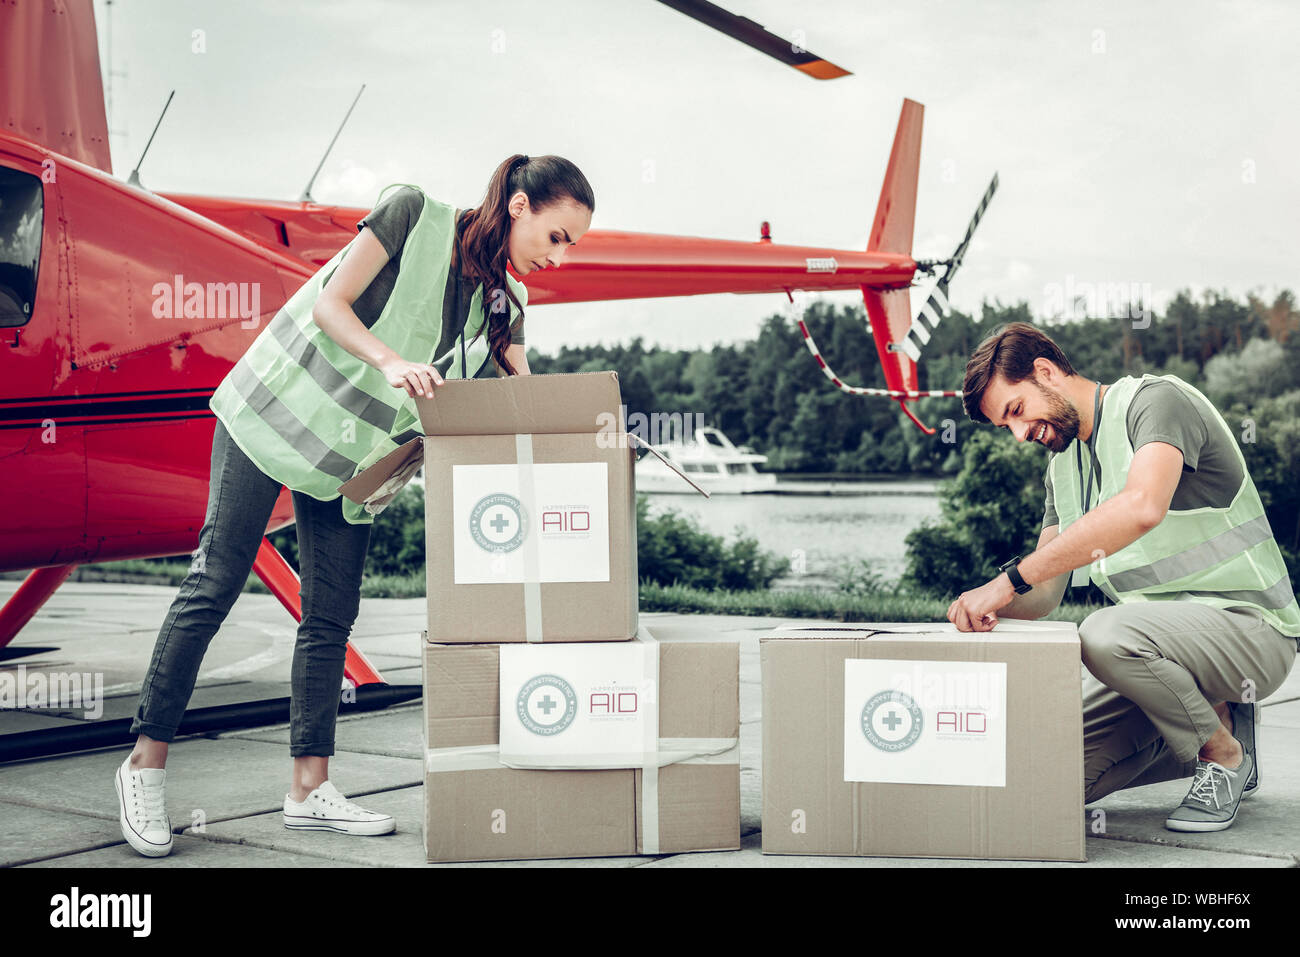 Humanitarian workers unpacking boxes after receiving them Stock Photo